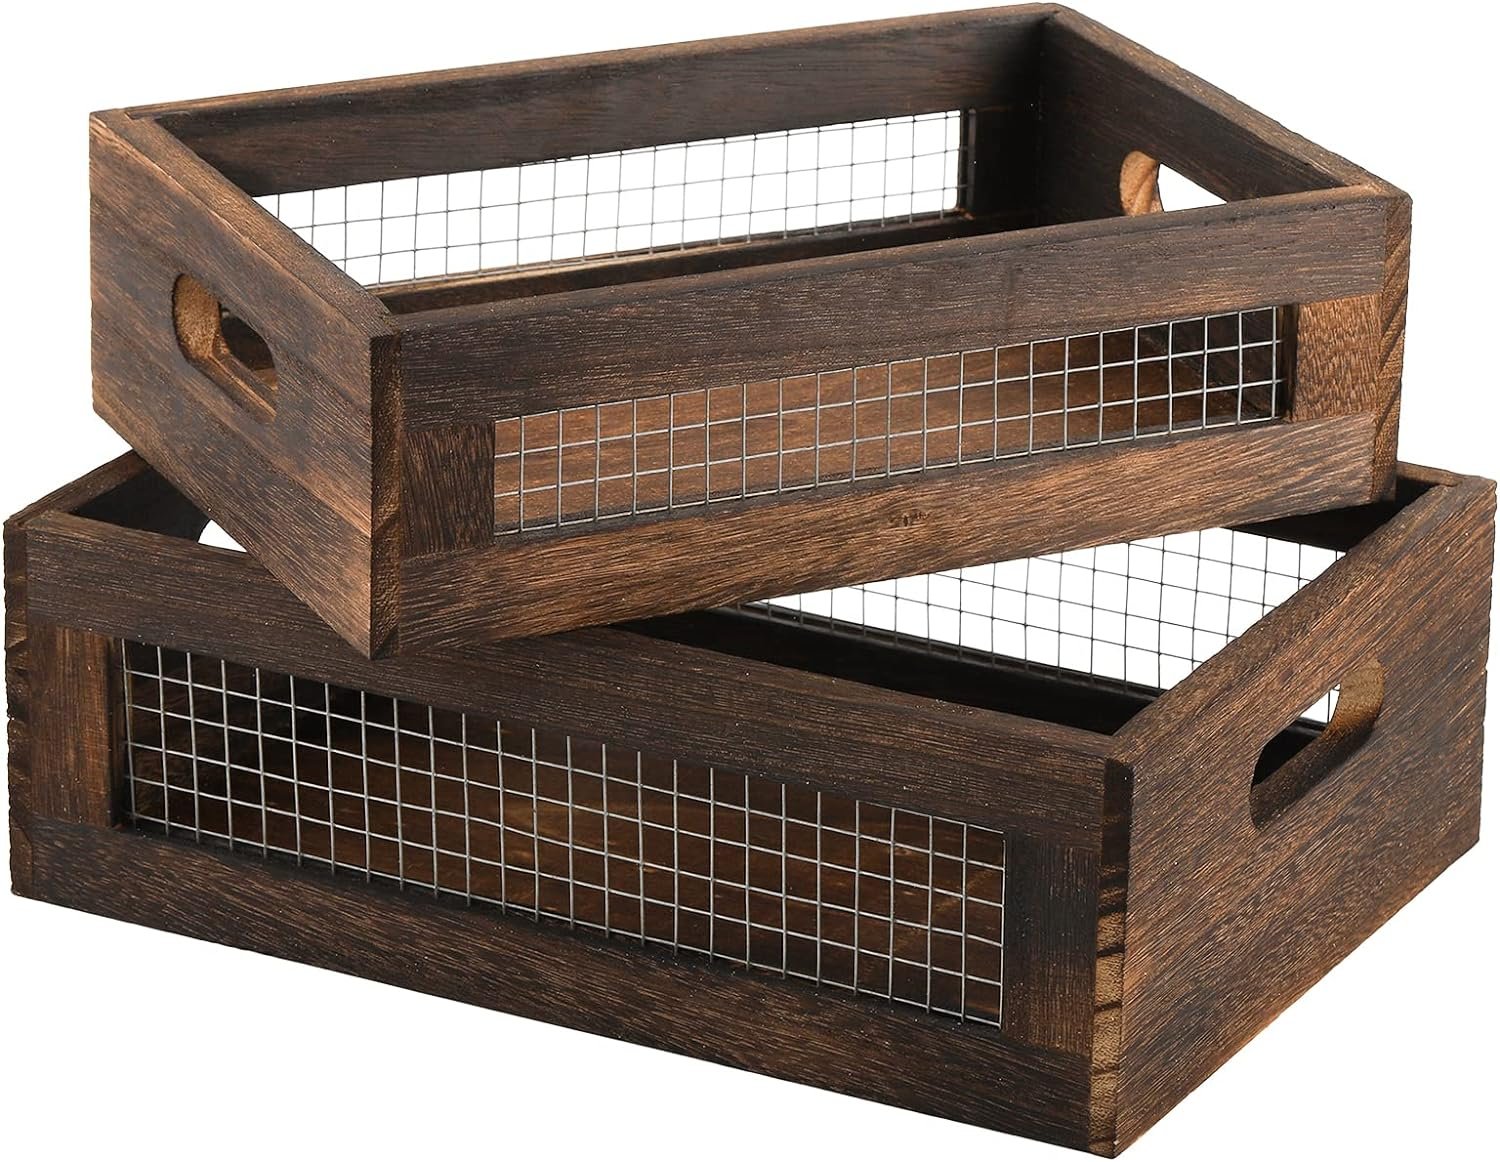 Dicunoy Rustic Nesting Boxes Review